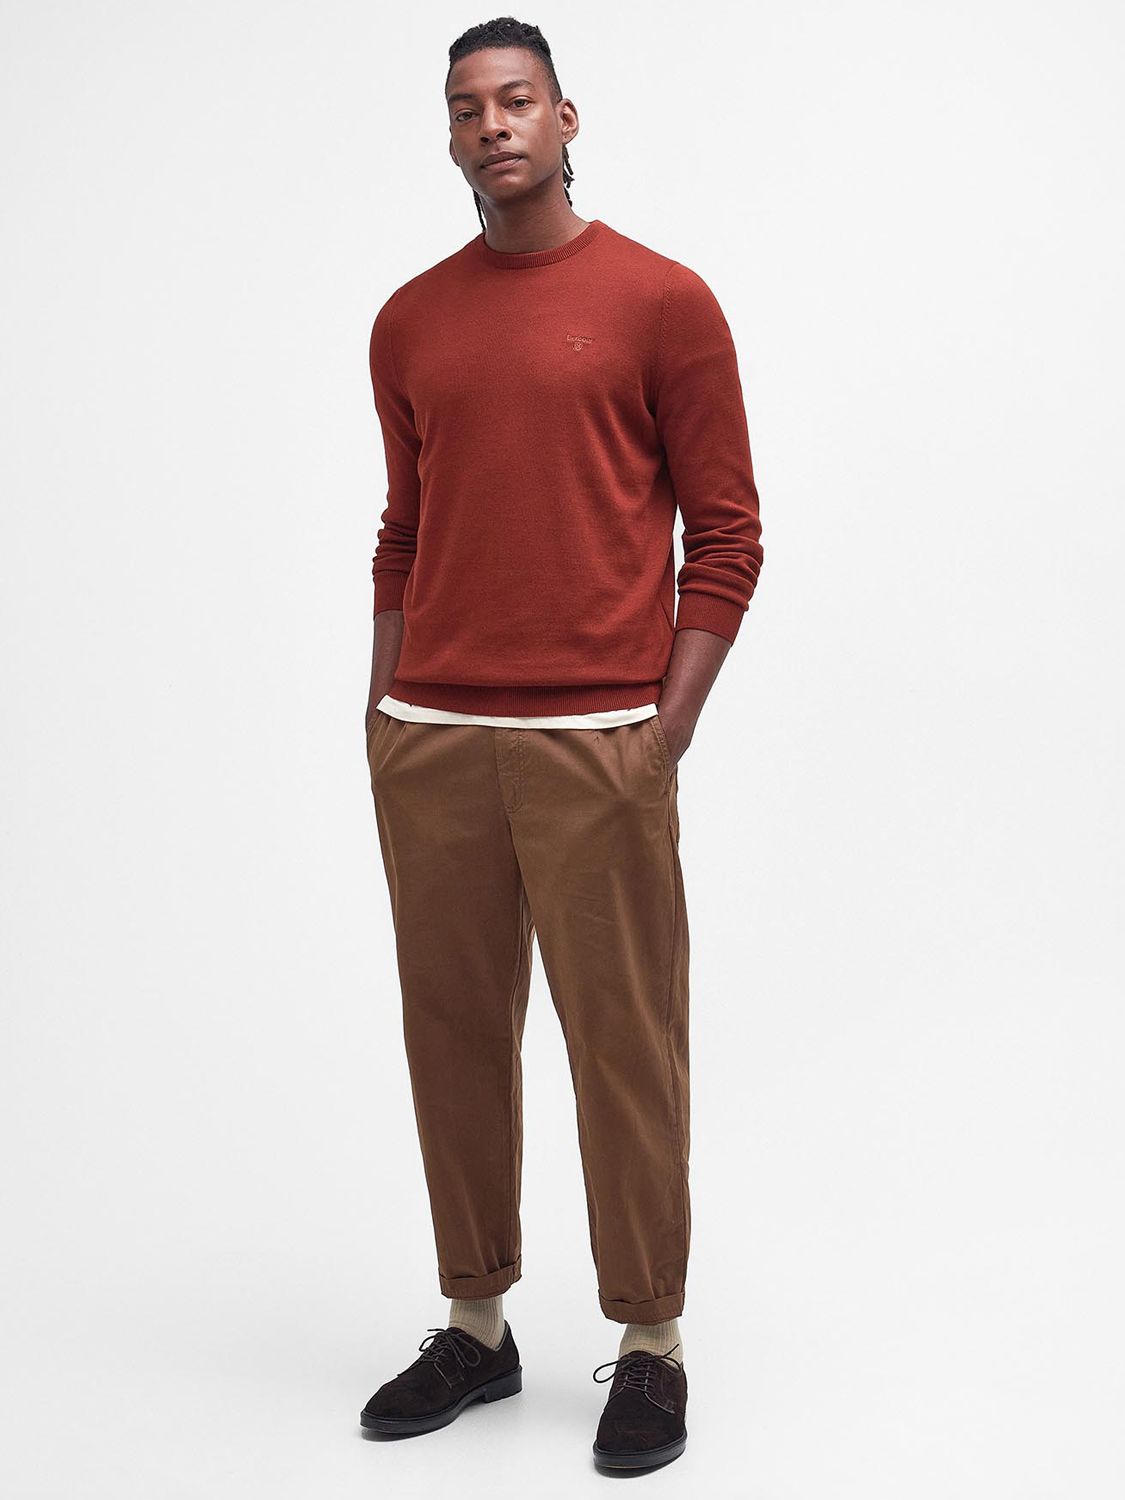 Barbour Pima Cotton Crew Neck Jumper, Fired Brick at John Lewis & Partners